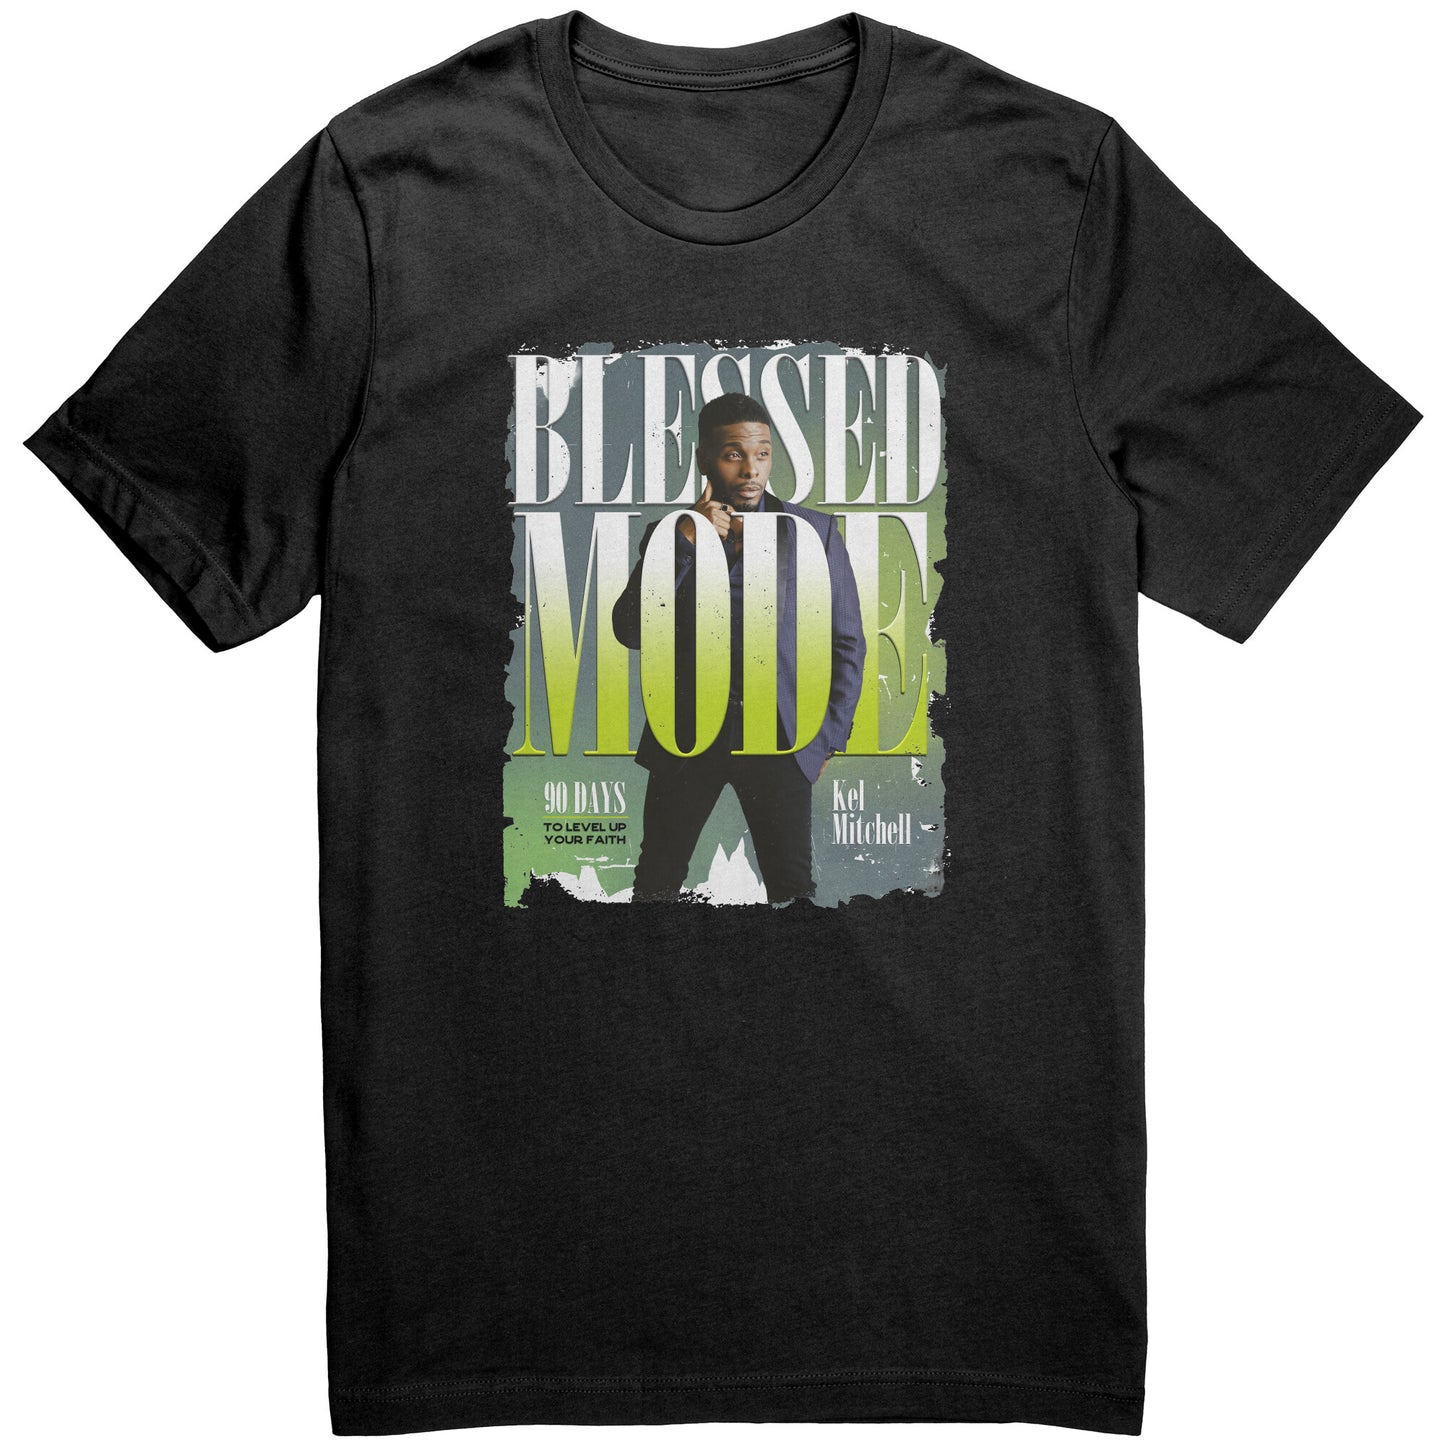 Blessed Mode t-shirt